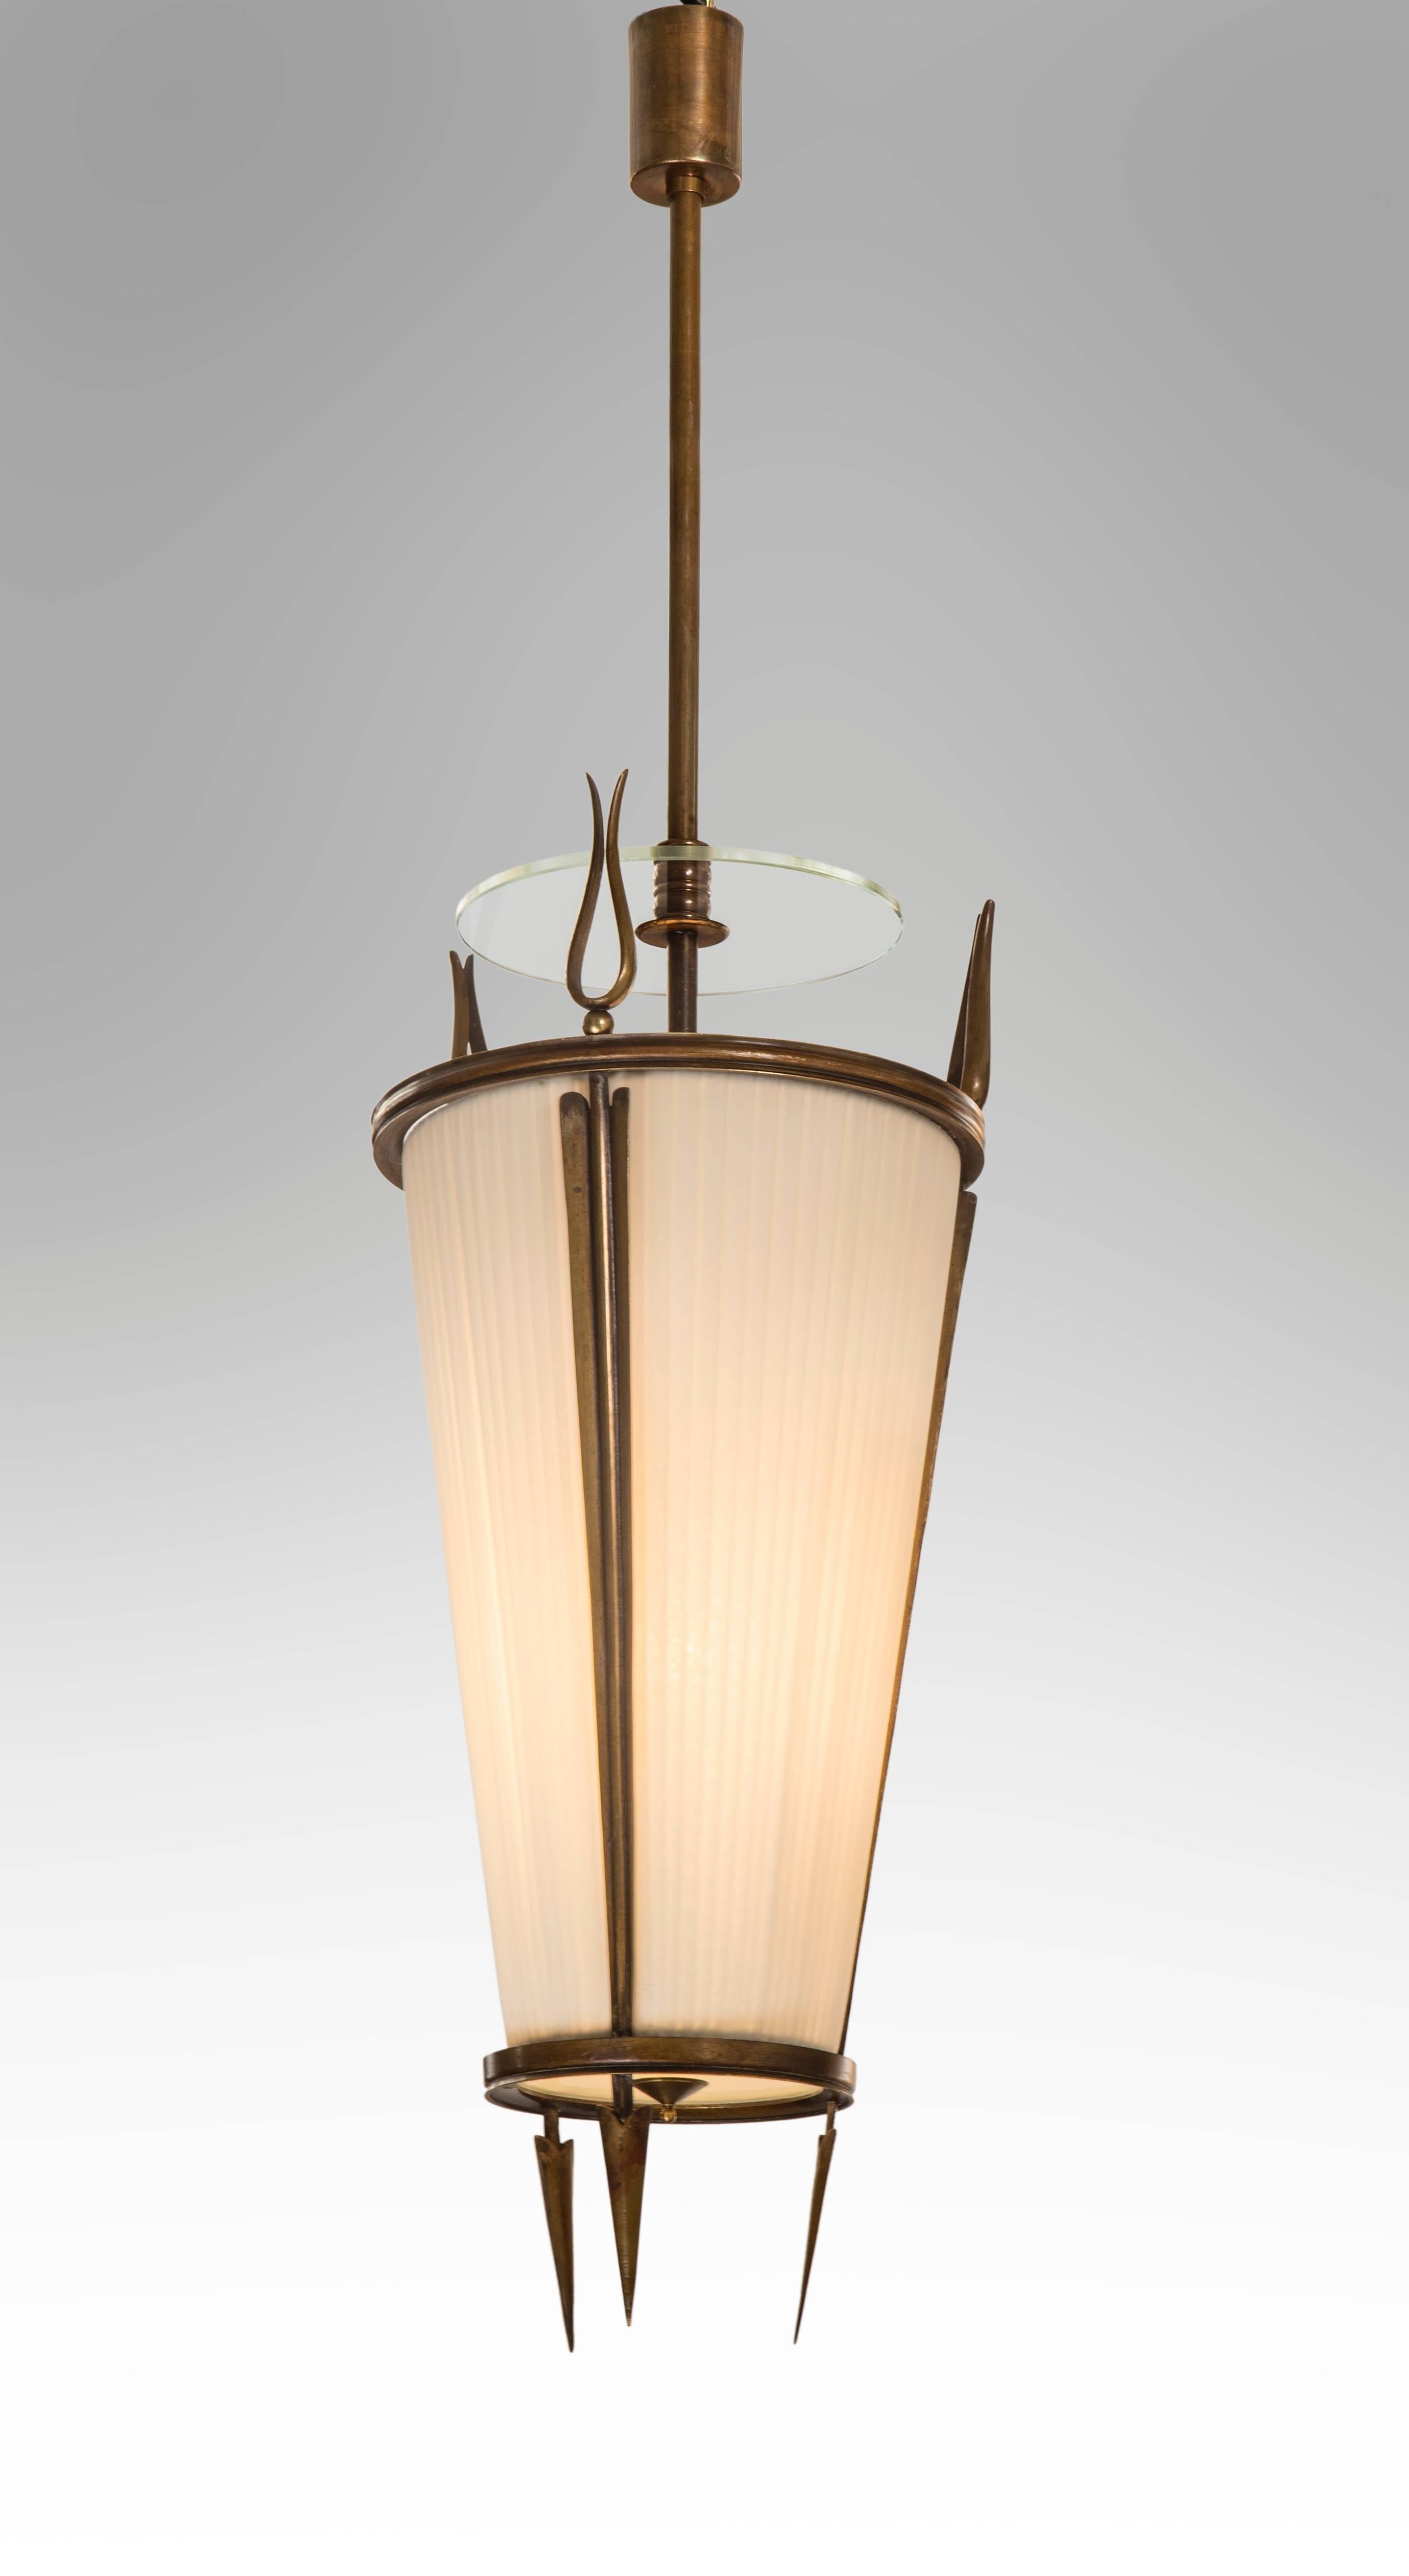 The cylindrical canopy above a suspension rod centering a floating glass disc, the conical body with a fabric shade framed by stylized arrows.

The same model lantern is illustrated by P. Buffa and A. Cassi, Decoratori e Architetti Contemporanei,